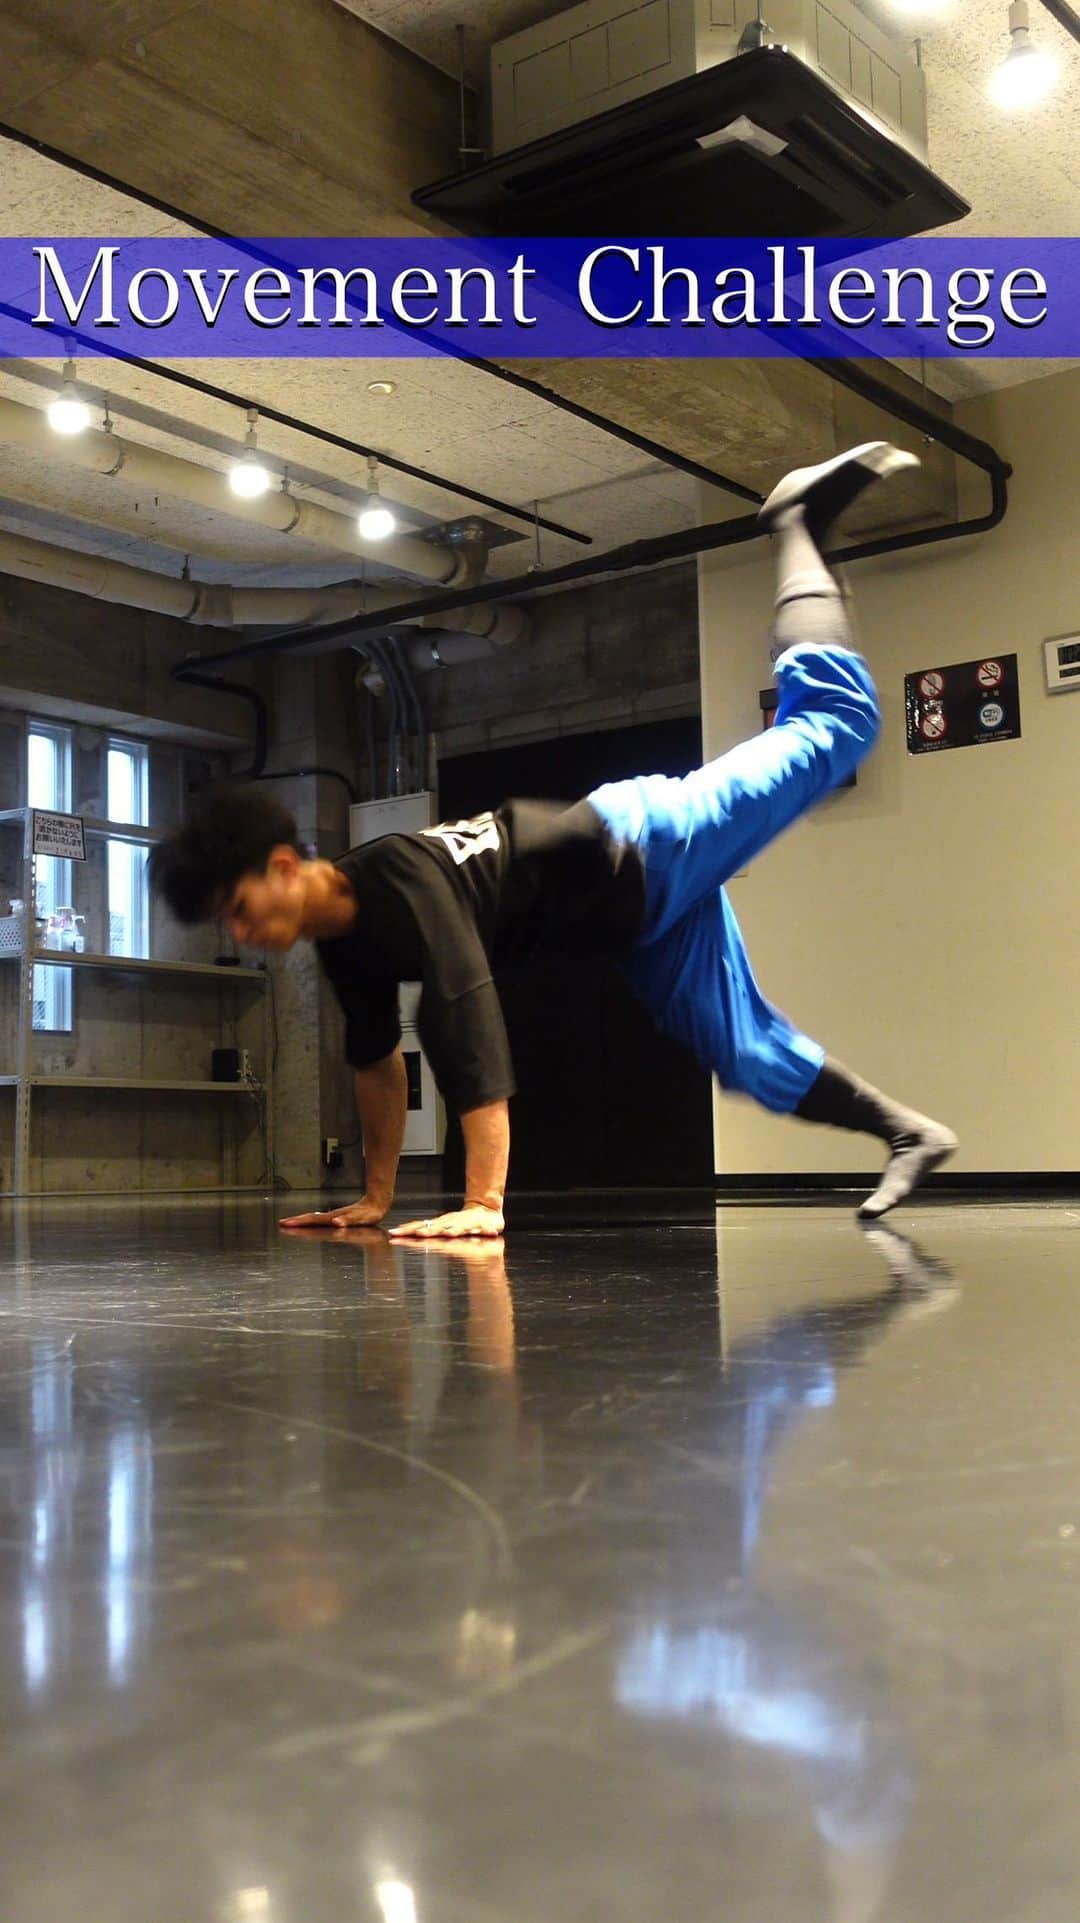 asukaのインスタグラム：「【Movement Challenge】  Everybody can do this skill 🔥   What do you think?🤔   Lectured by @bboy_asuka   If you can master it, let me know in the comments😉   ↓↓↓↓    #dance #breaking #breakdance #bboy #powermove #powermoves #acrobatics #tricking #parkour #gymnastics #movement #capoeira #ブレイキン #超人」